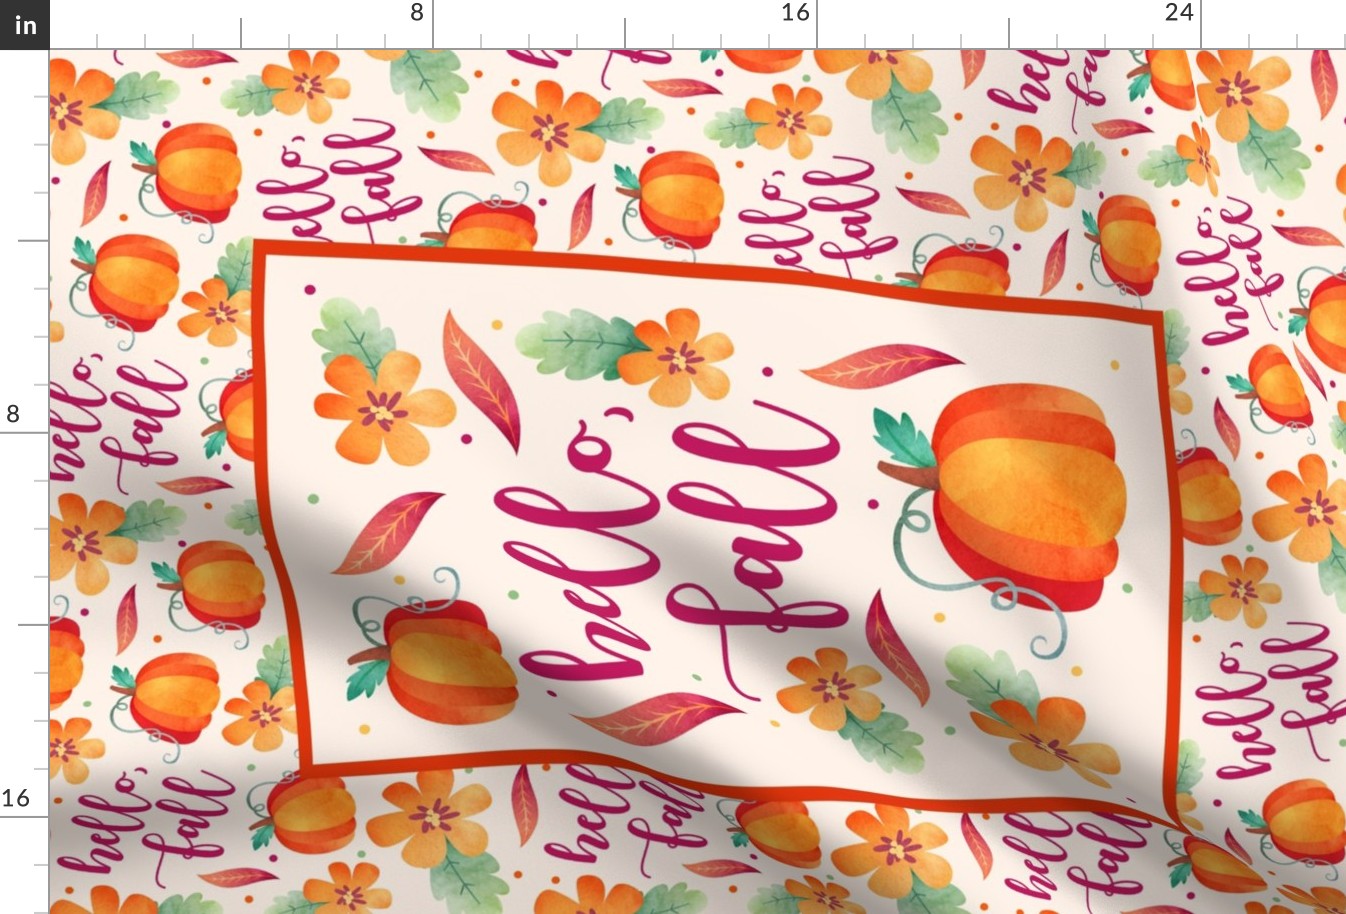 Large 27x18 Fat Quarter Panel for Tea Towel or Wall Art Hanging Hello Fall Watercolor Pumpkins and Flowers